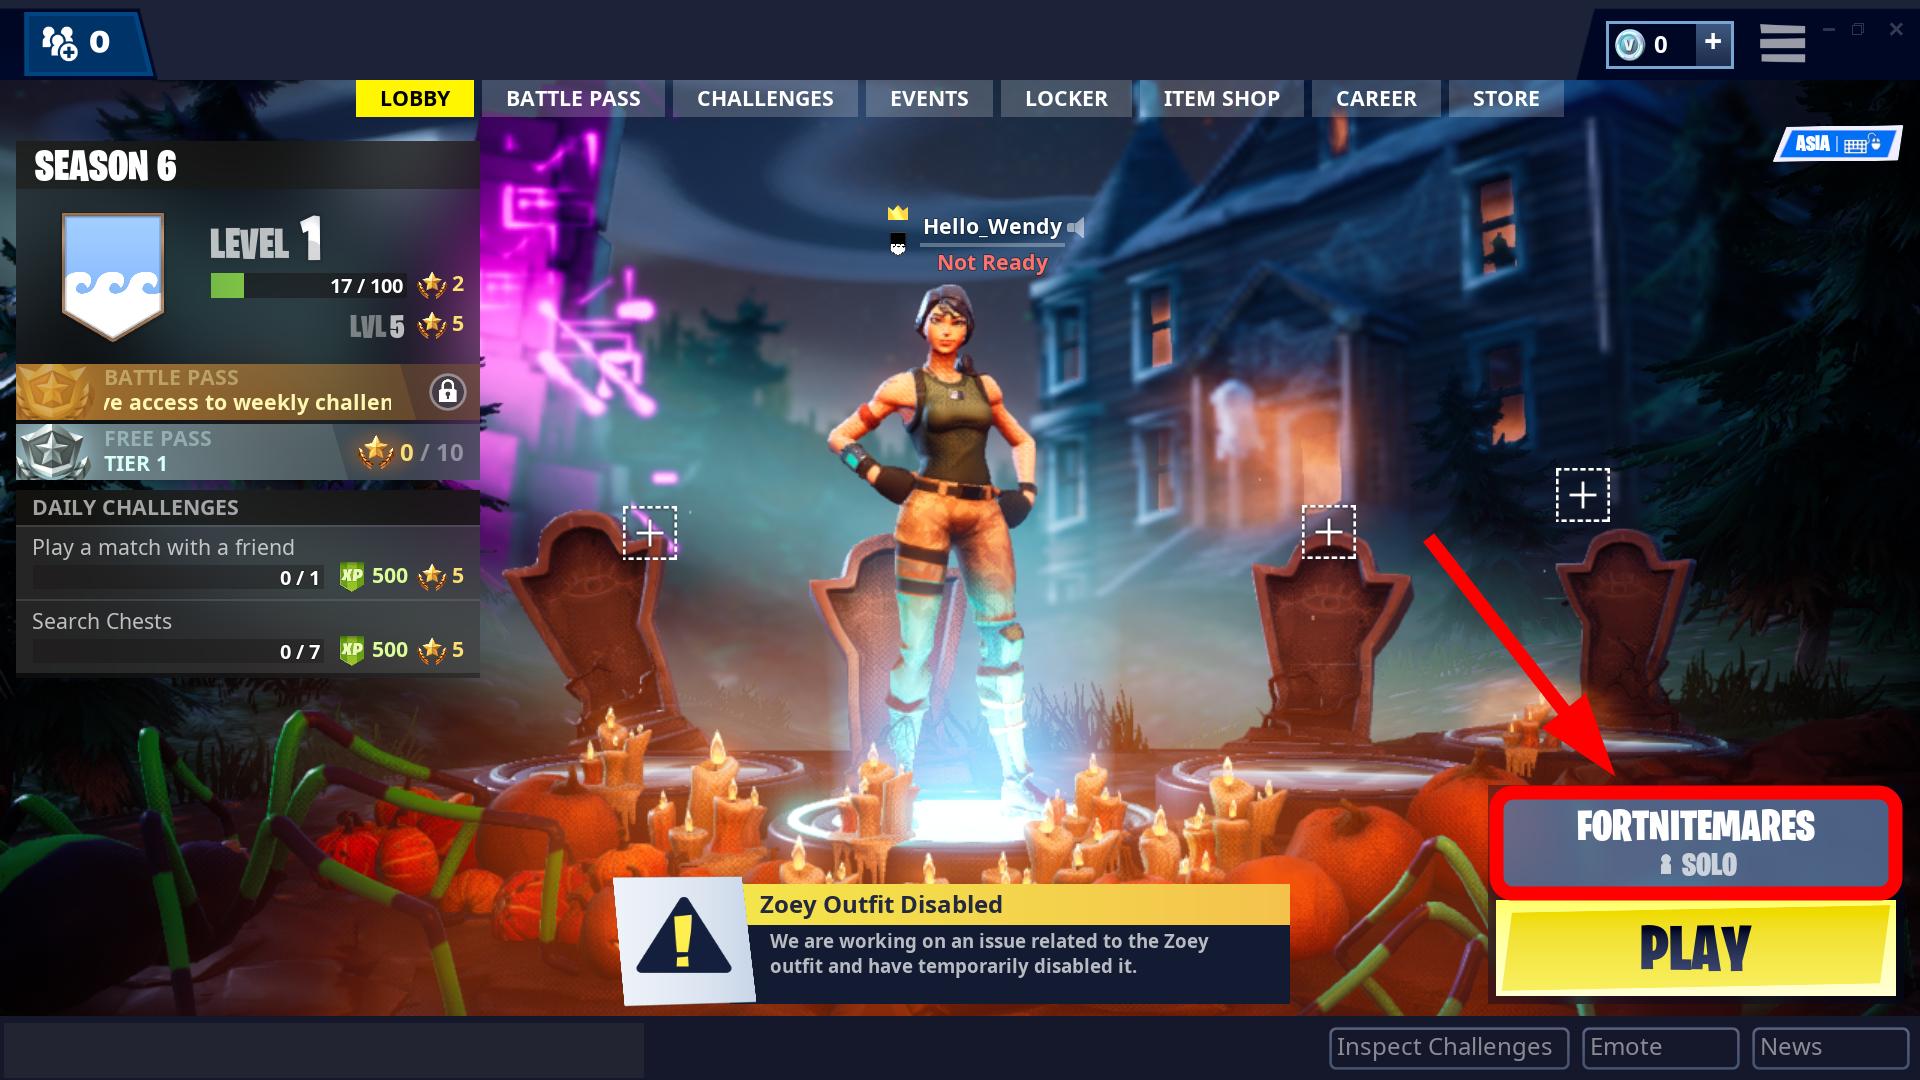 How to download 'Fortnite' on your Windows PC in a few simple steps